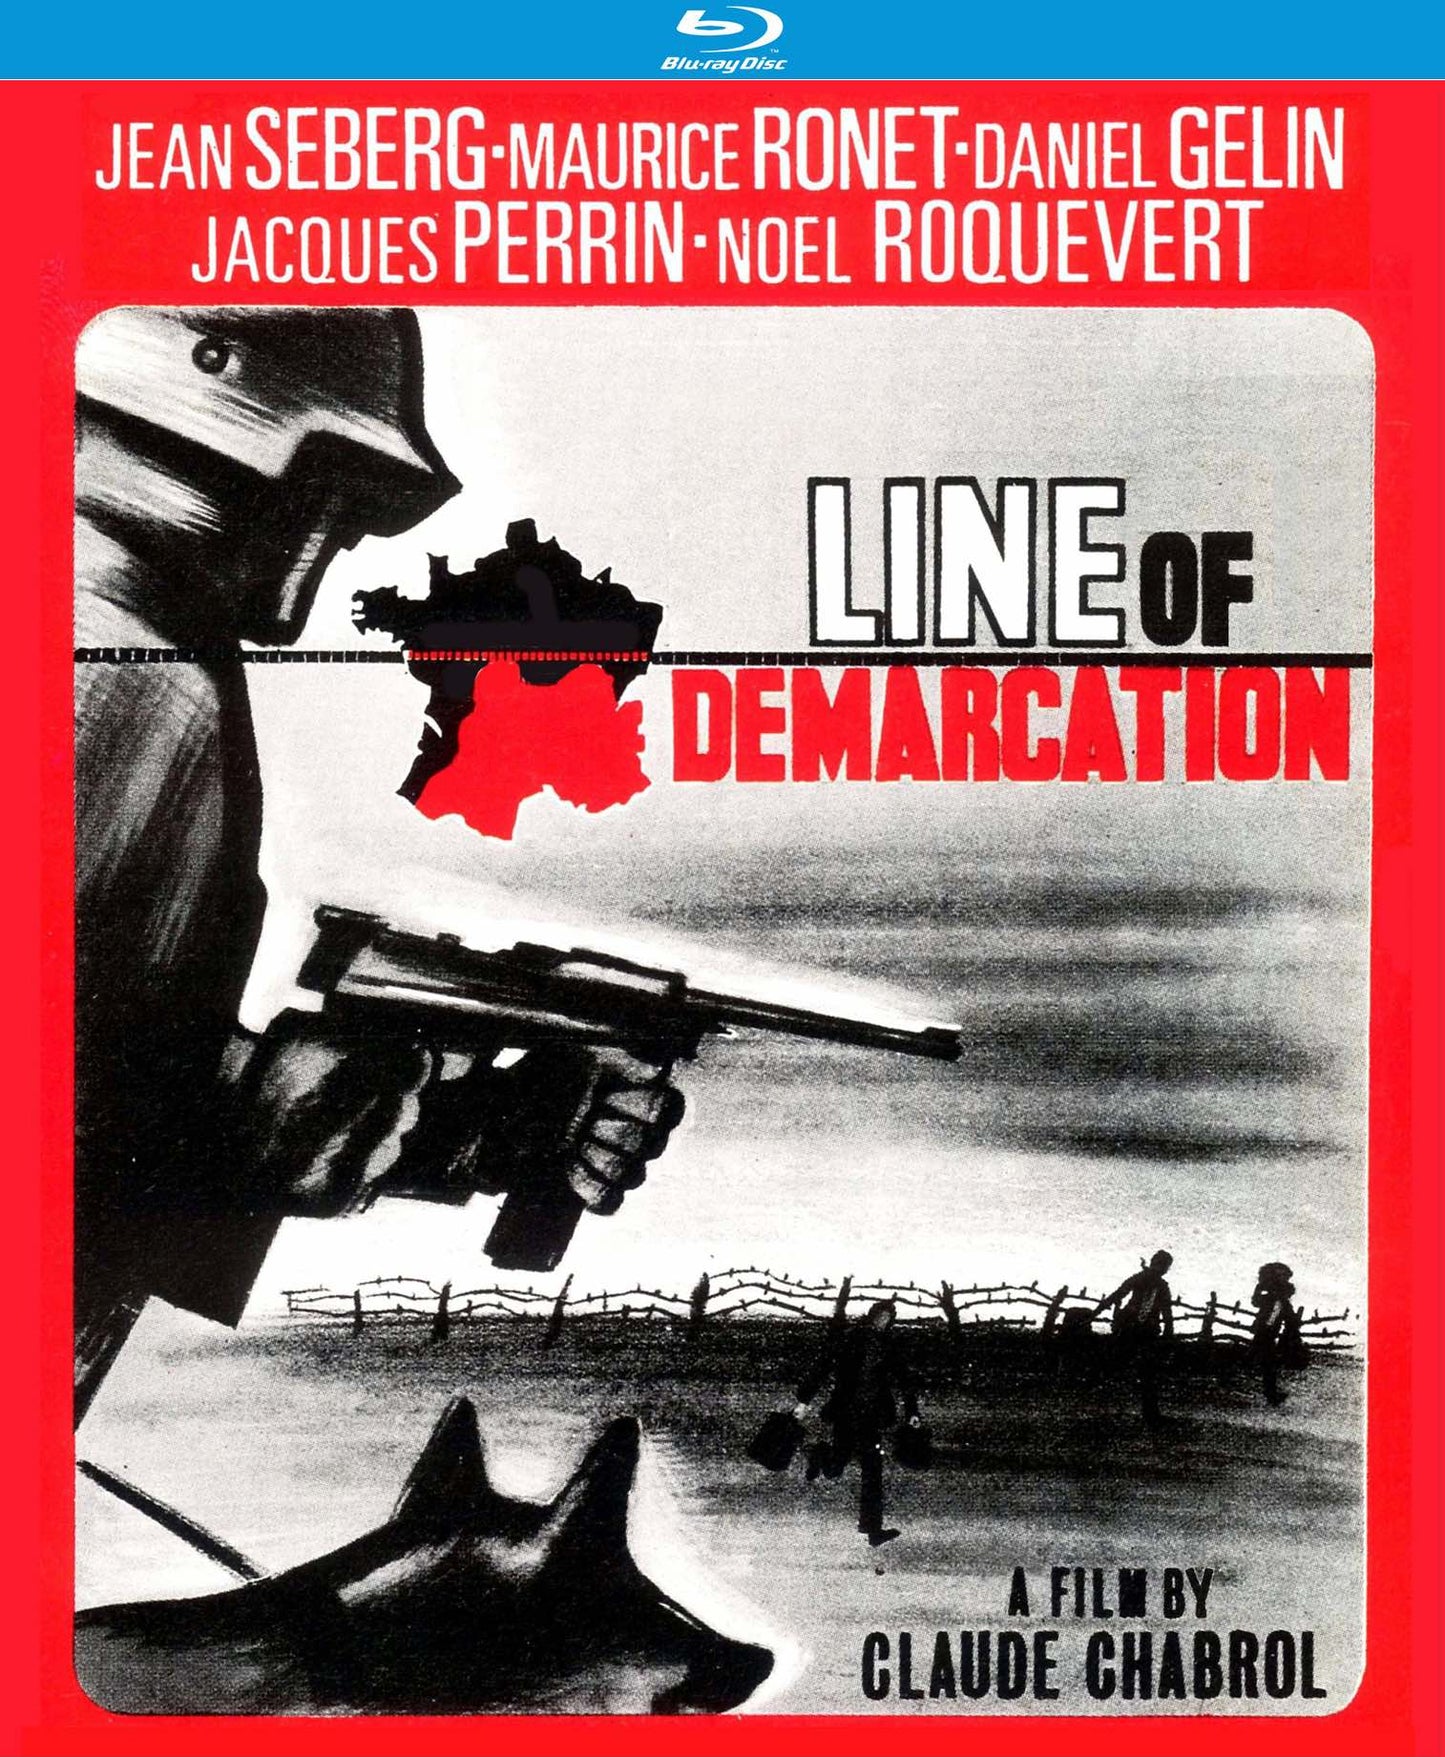 Line of Demarcation [Blu-ray] cover art